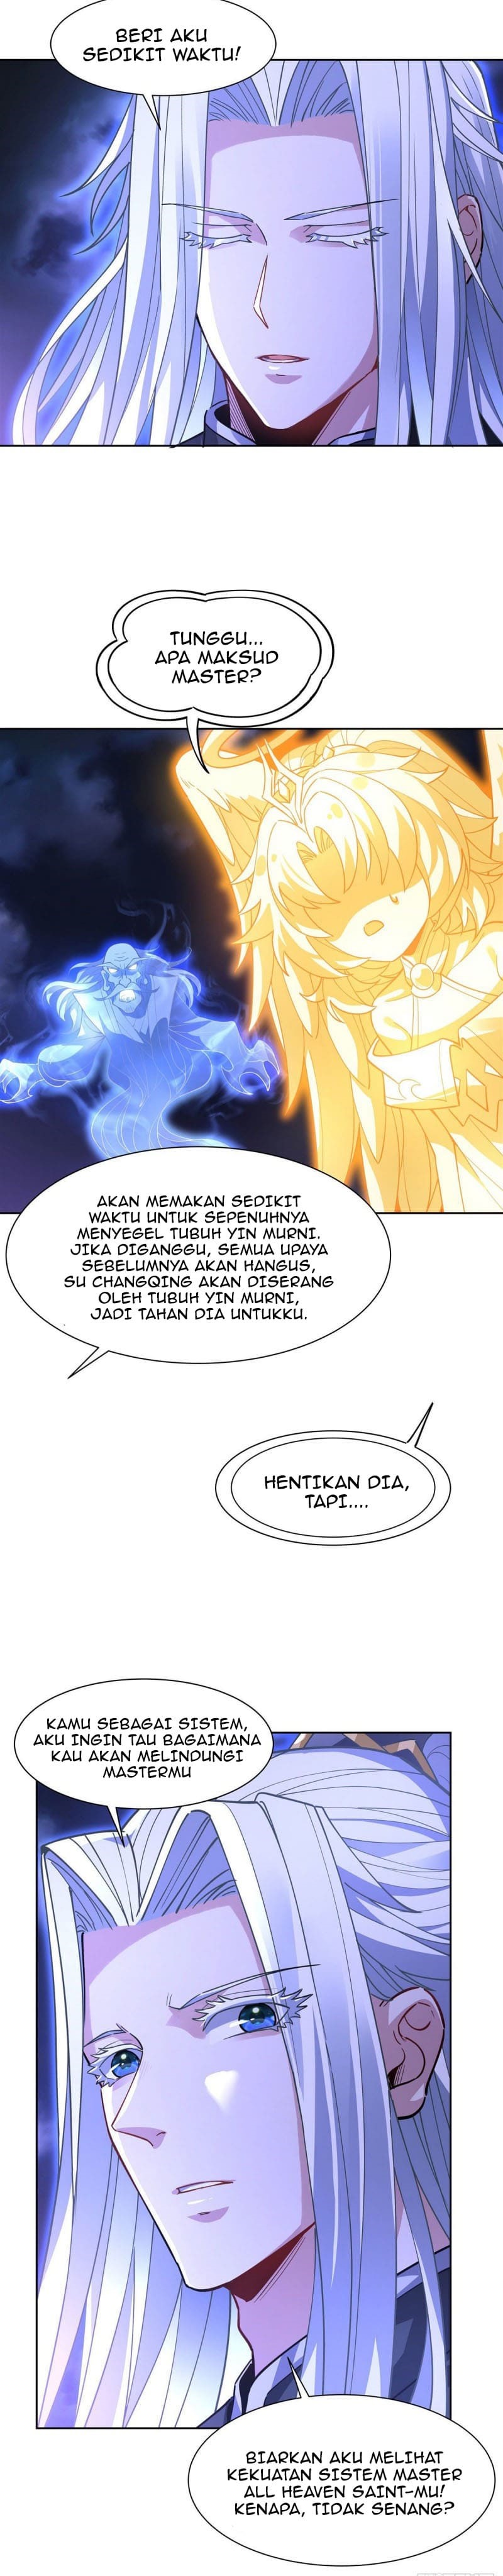 Dilarang COPAS - situs resmi www.mangacanblog.com - Komik my female apprentices are all big shots from the future 039 - chapter 39 40 Indonesia my female apprentices are all big shots from the future 039 - chapter 39 Terbaru 11|Baca Manga Komik Indonesia|Mangacan